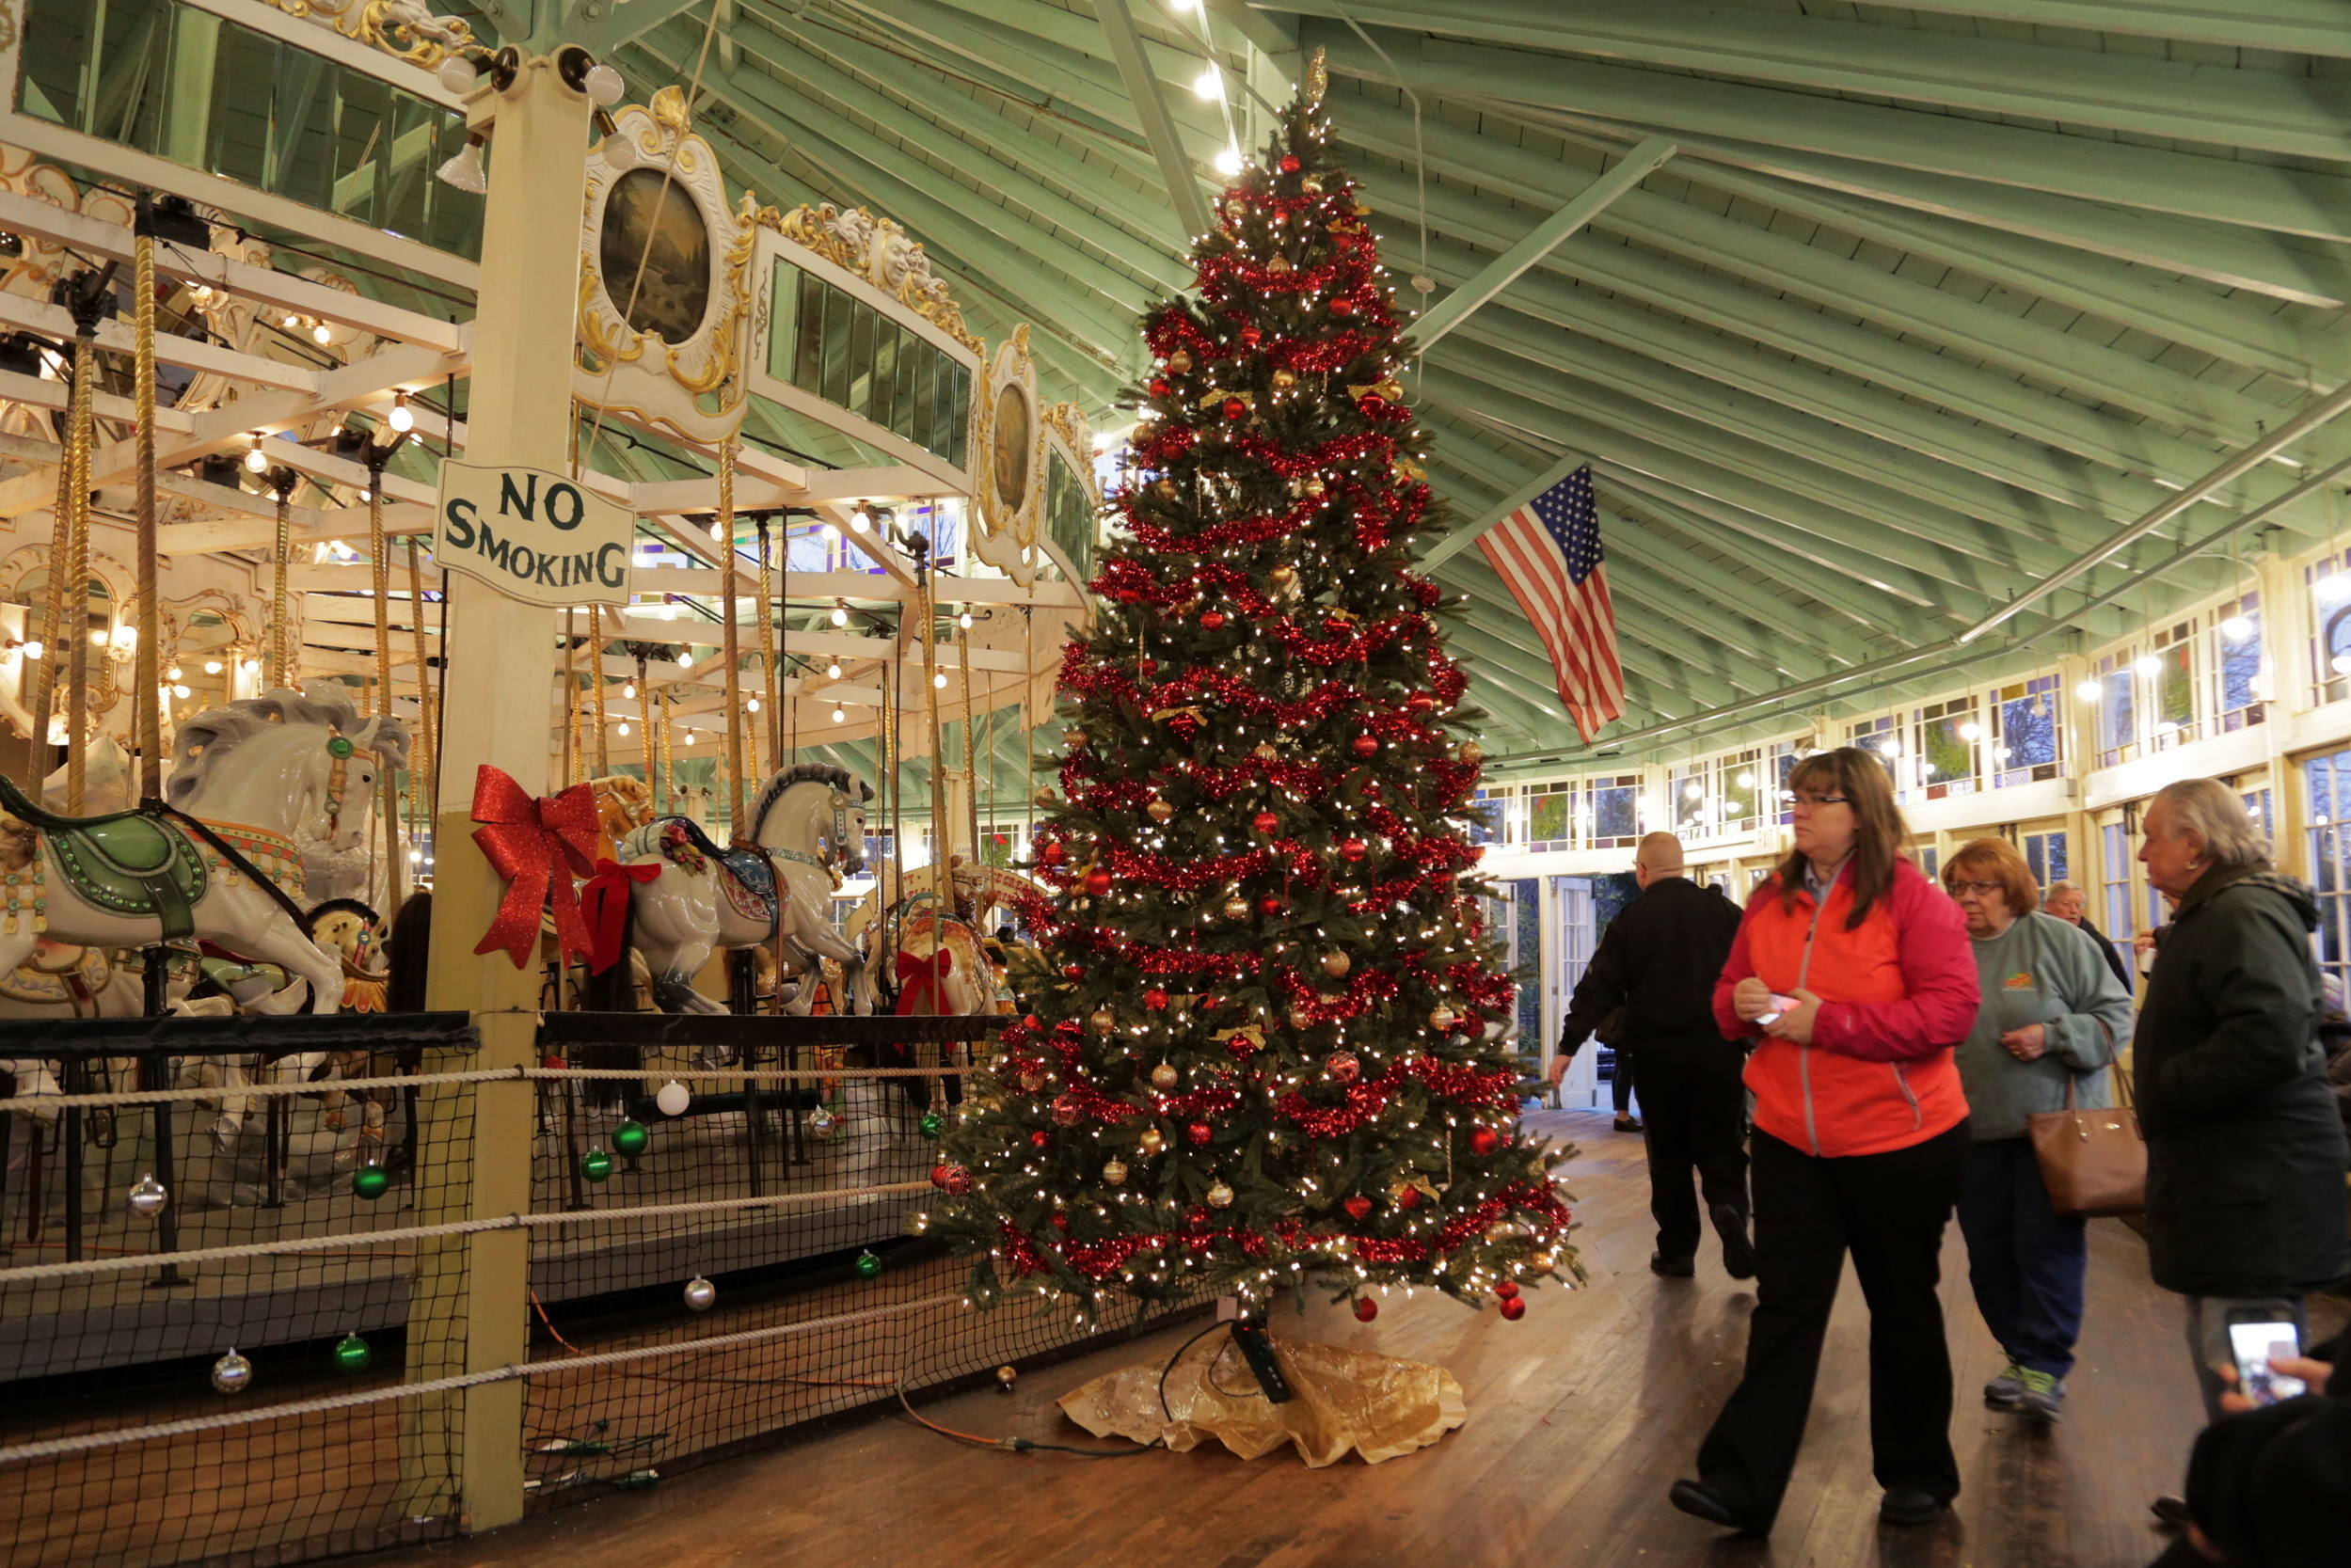 The newly illuminated Christmas Tree stands inside the Crescent Park Carousel.